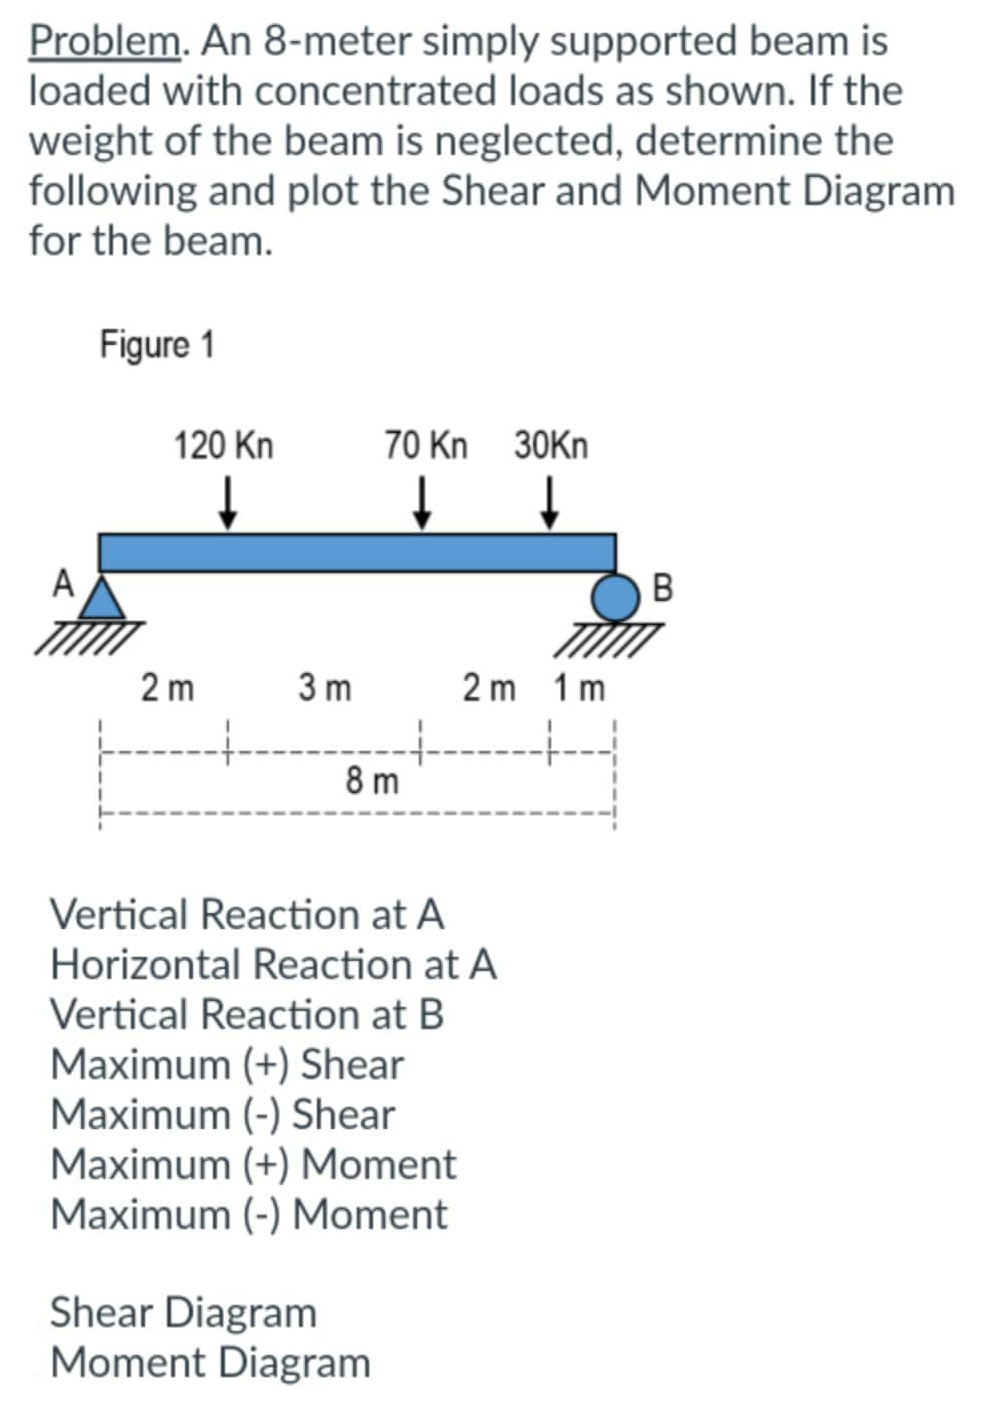 Problem. An 8-meter simply supported beam is
loaded with concentrated loads as shown. If the
weight of the beam is neglected, determine the
following and plot the Shear and Moment Diagram
for the beam.
Figure 1
A
120 Kn
↓
2 m
3 m
70 Kn 30Kn
↓
↓
8 m
Shear Diagram
Moment Diagram
2 m 1 m
Vertical Reaction at A
Horizontal Reaction at A
Vertical Reaction at B
Maximum (+) Shear
Maximum (-) Shear
Maximum (+) Moment
Maximum (-) Moment
B